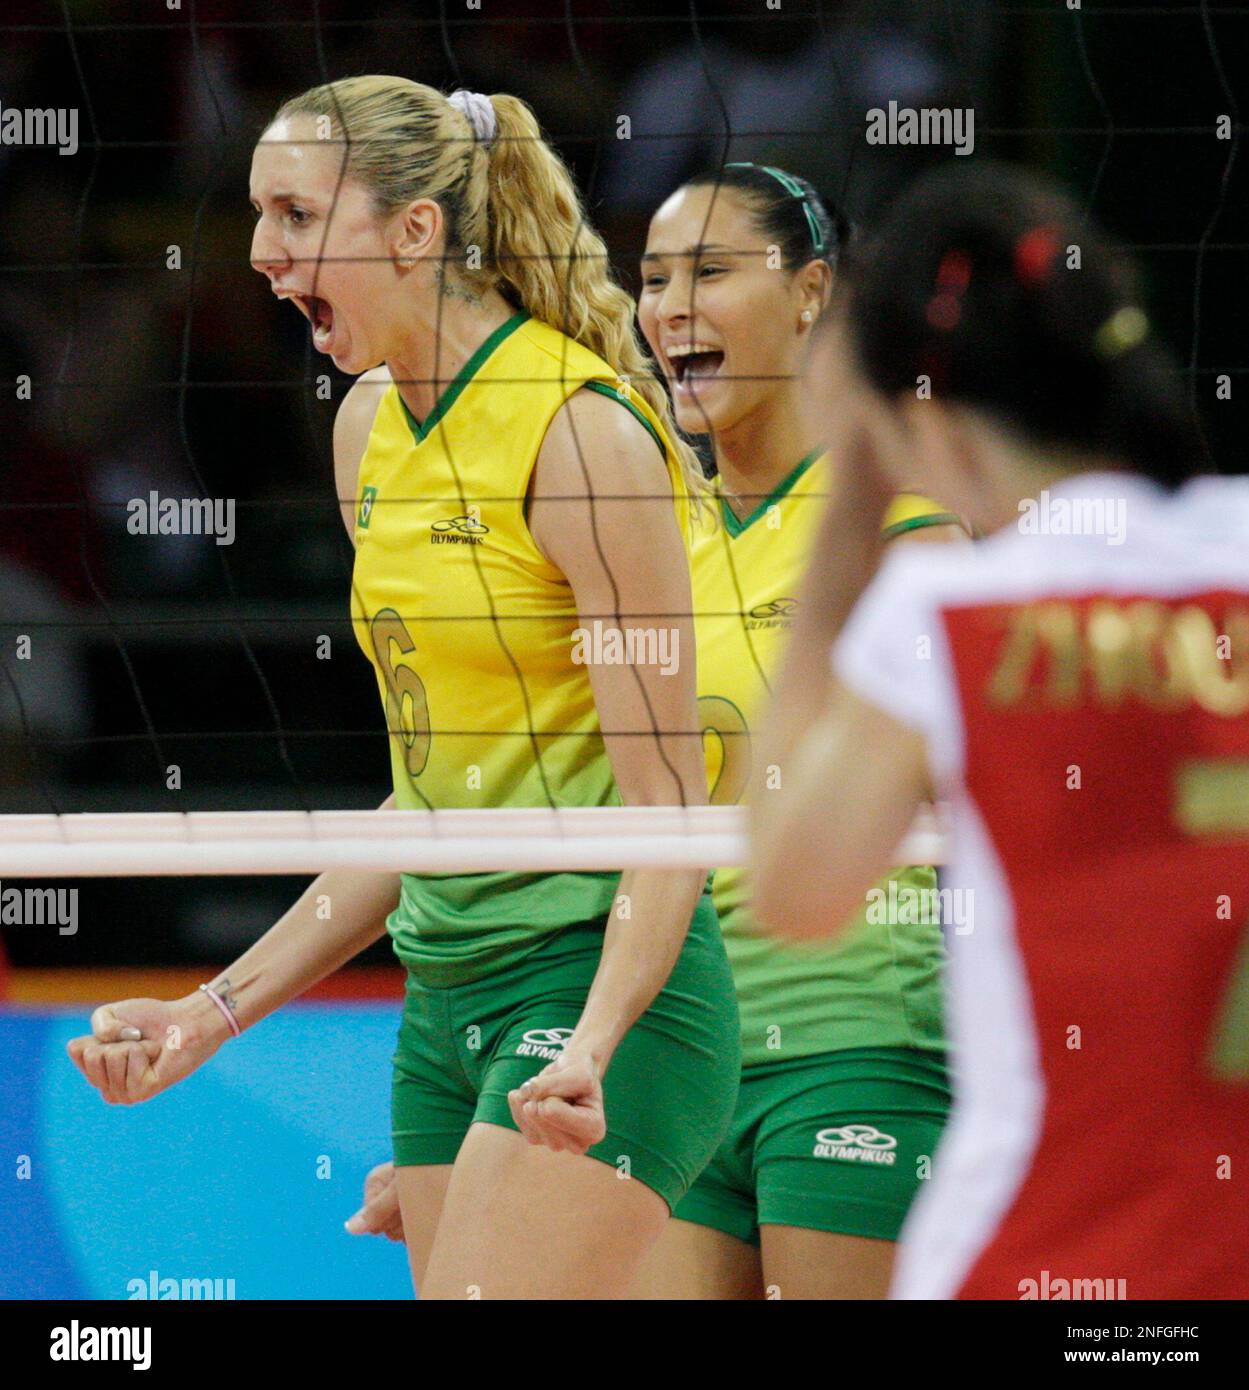 Brazil's Thaisa Menezes (6) and Jaqueline Carvalho celebrate after they scored a point against China during their women's volleyball semifinals match at the Beijing 2008 Olympics in Beijing, Thursday, Aug. 21, 2008. (AP Photo/Andy Wong) Stock Photo